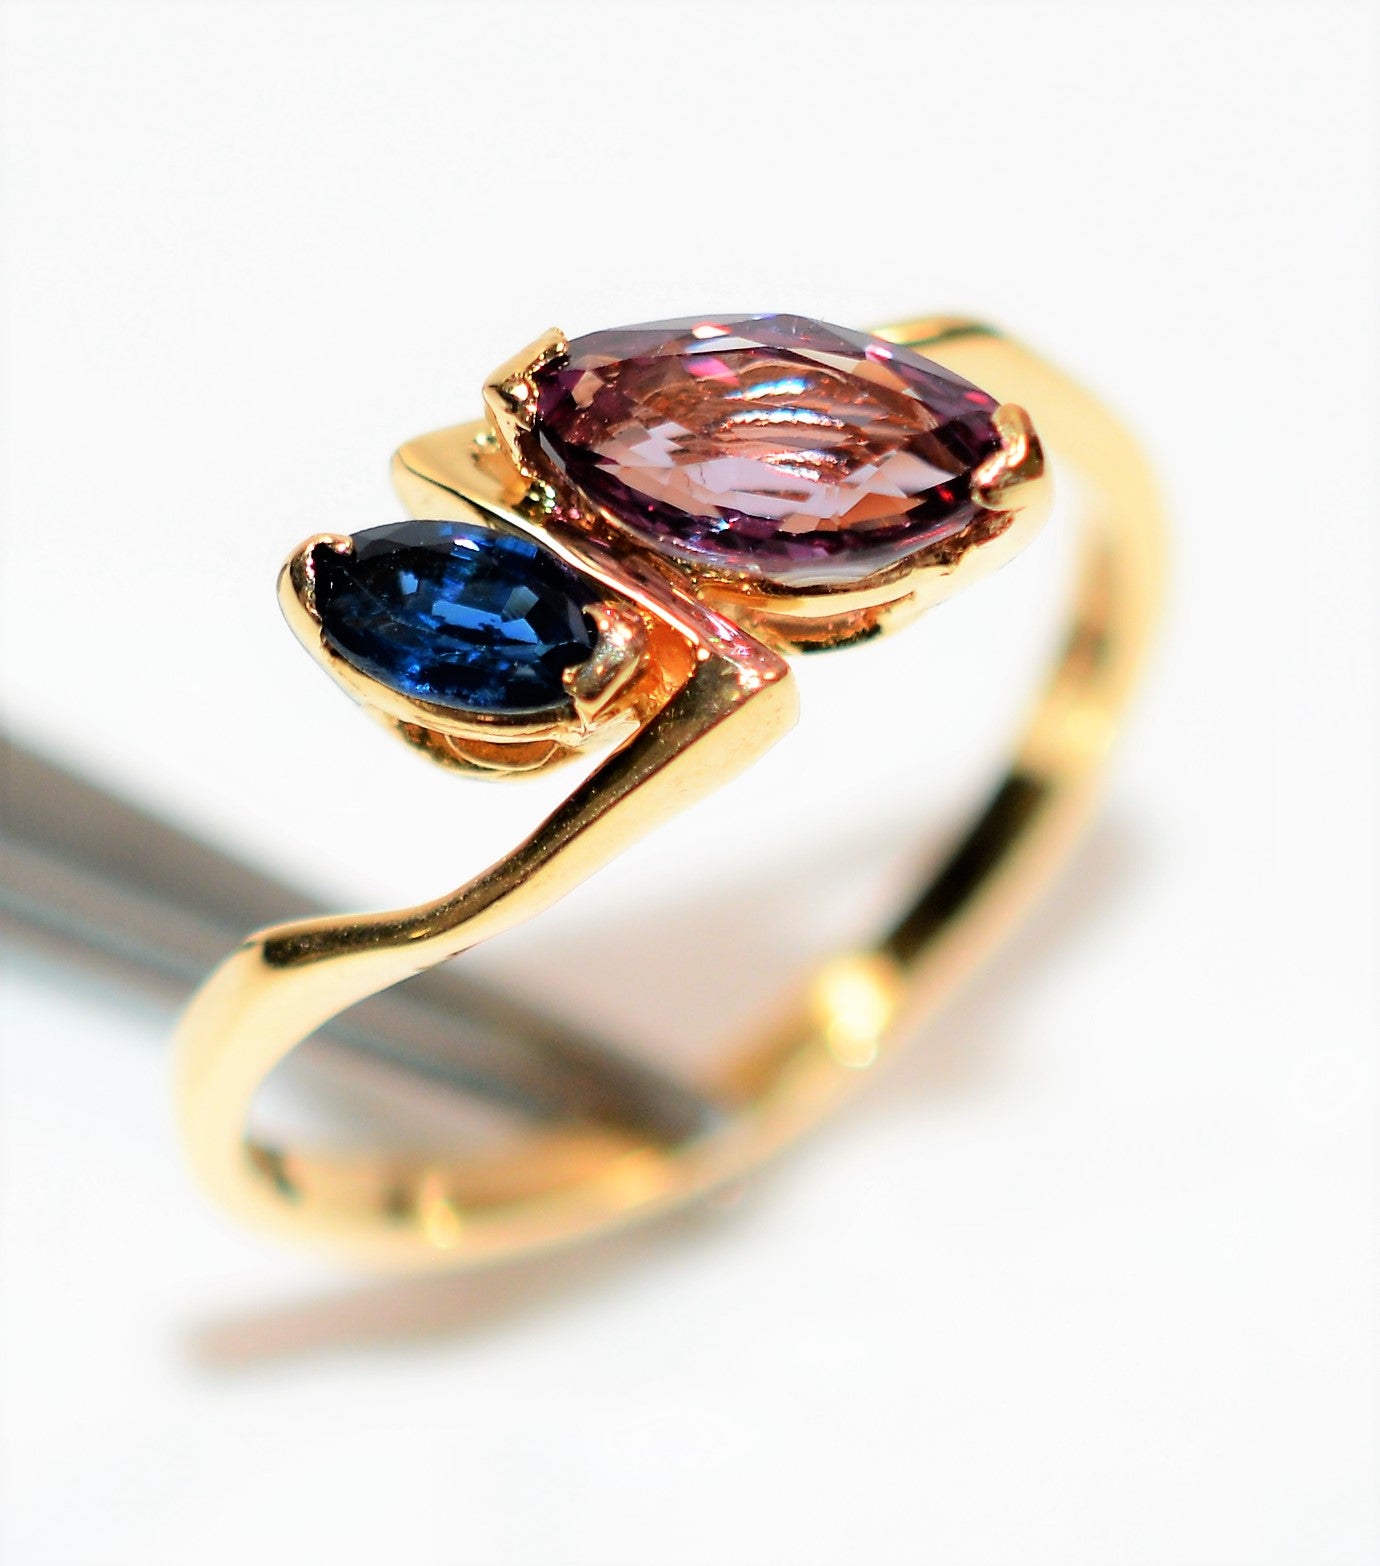 Natural Spinel & Blue Sapphire Ring 14K Solid Gold .86tcw Gemstone Ring Birthstone Ring Multistone Ring Statement Ring Women's Ring Jewelry